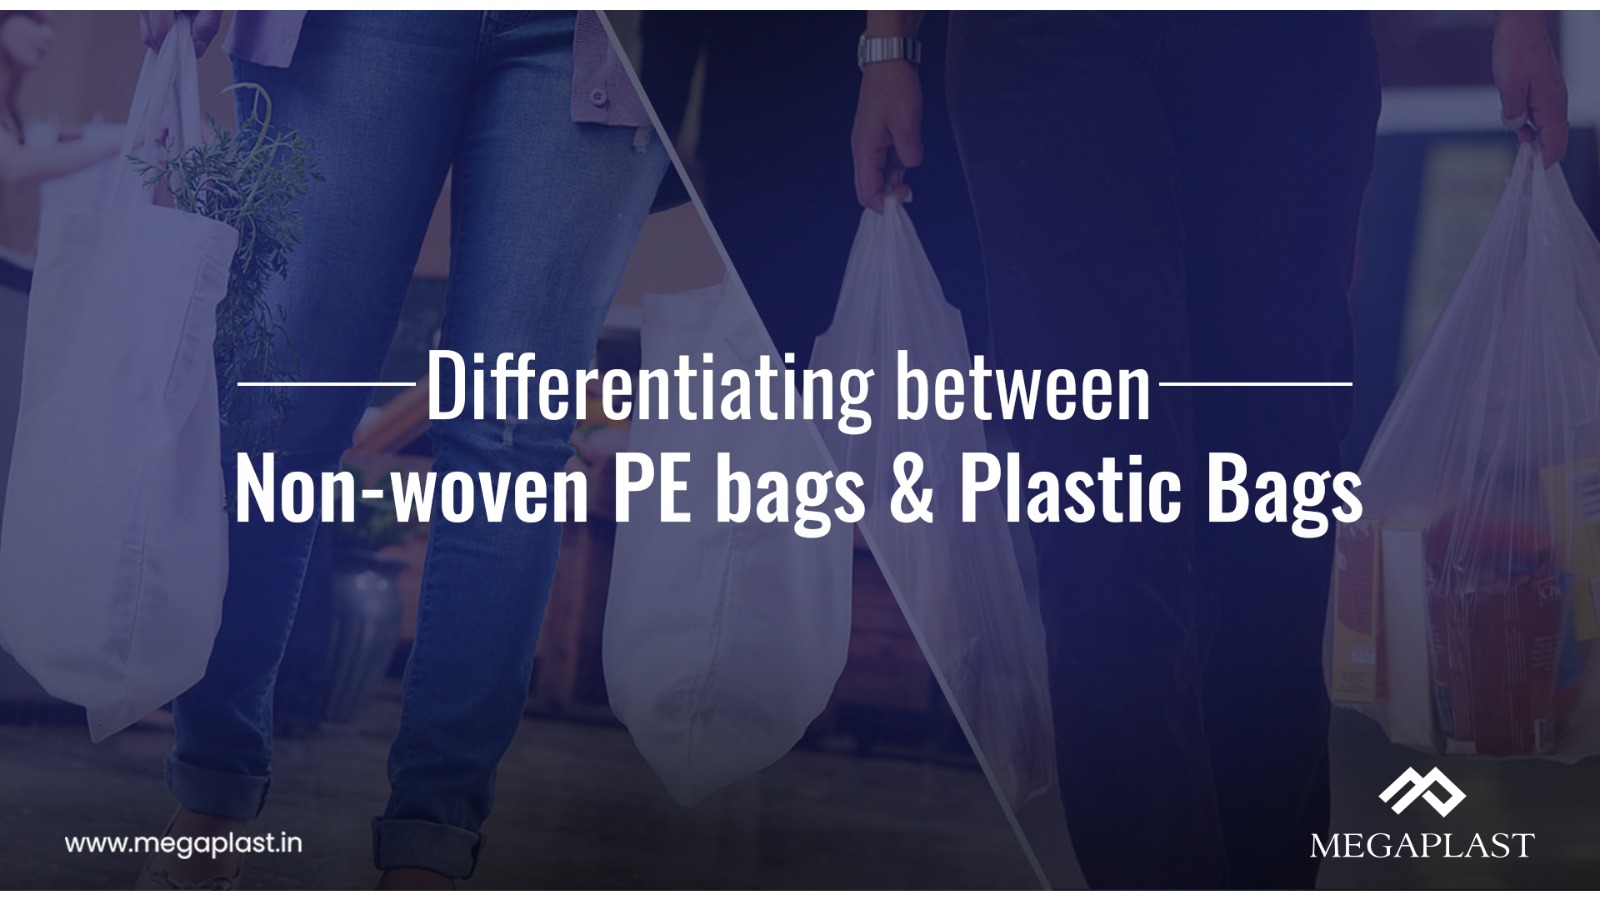 Differentiating between Non-woven PE bags and Plastic Bags